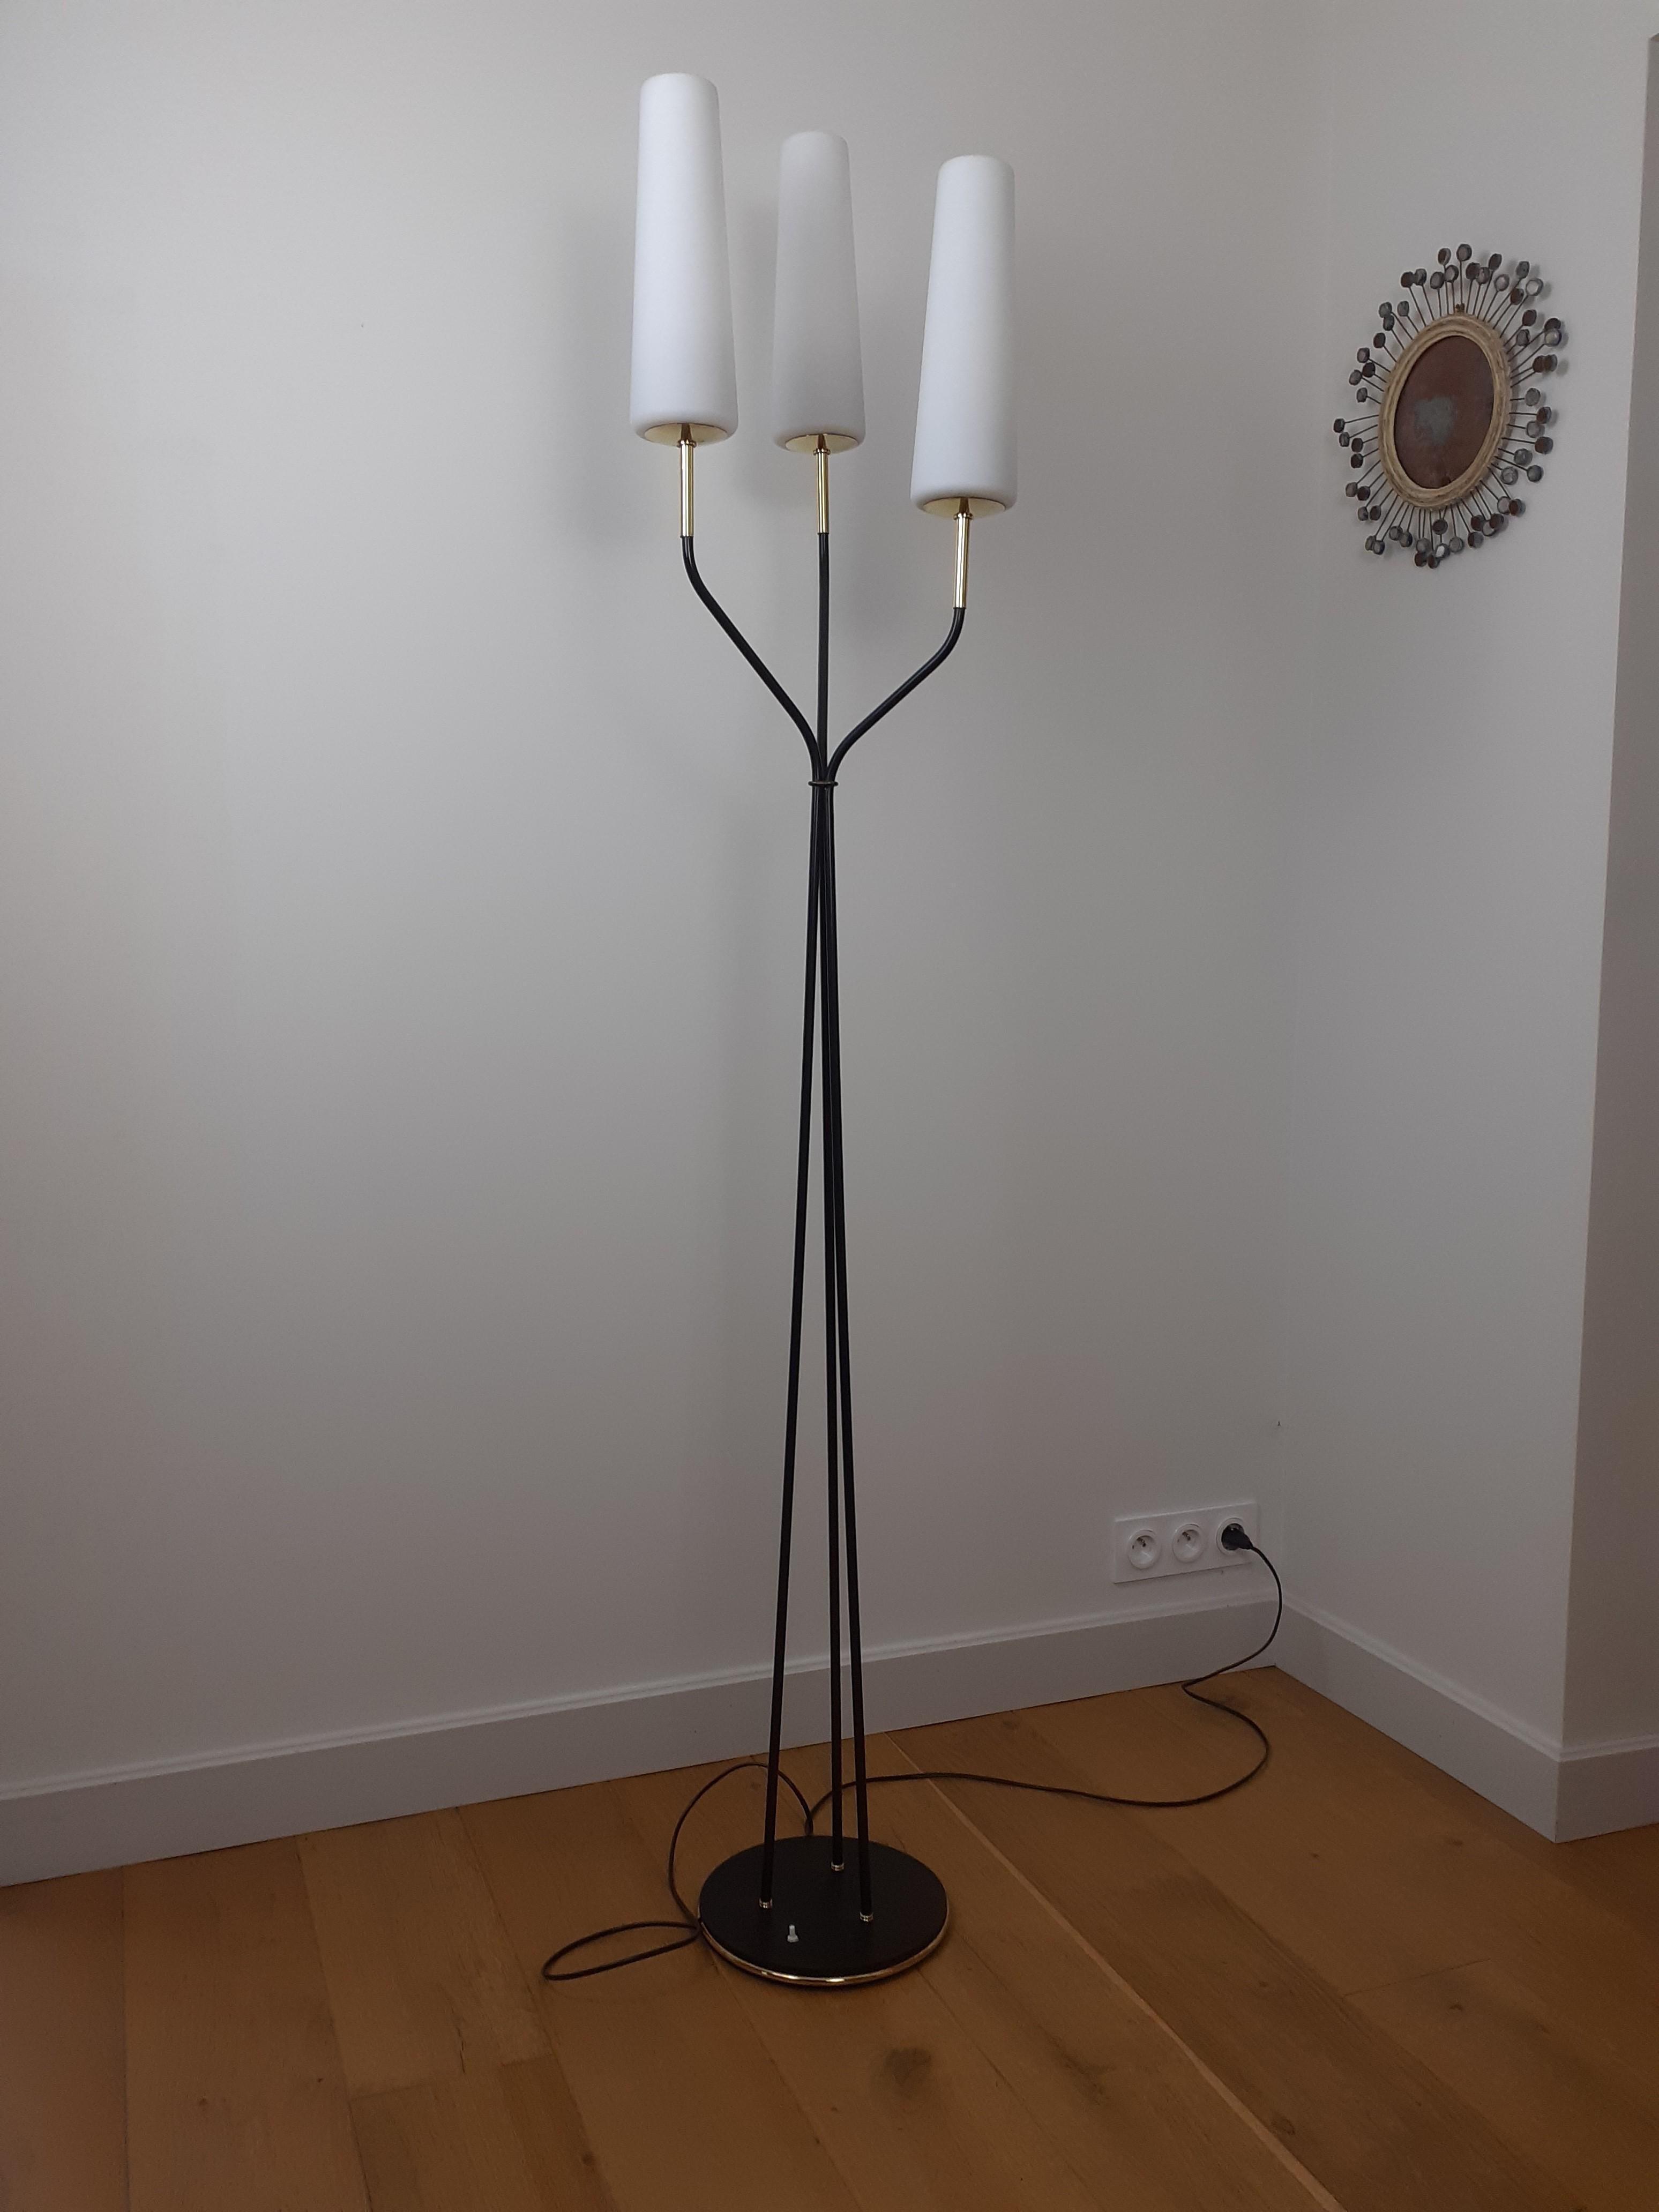 Mid-Century Modern Floor Lamp with 3 Sconces, Lunel House, circa 1950